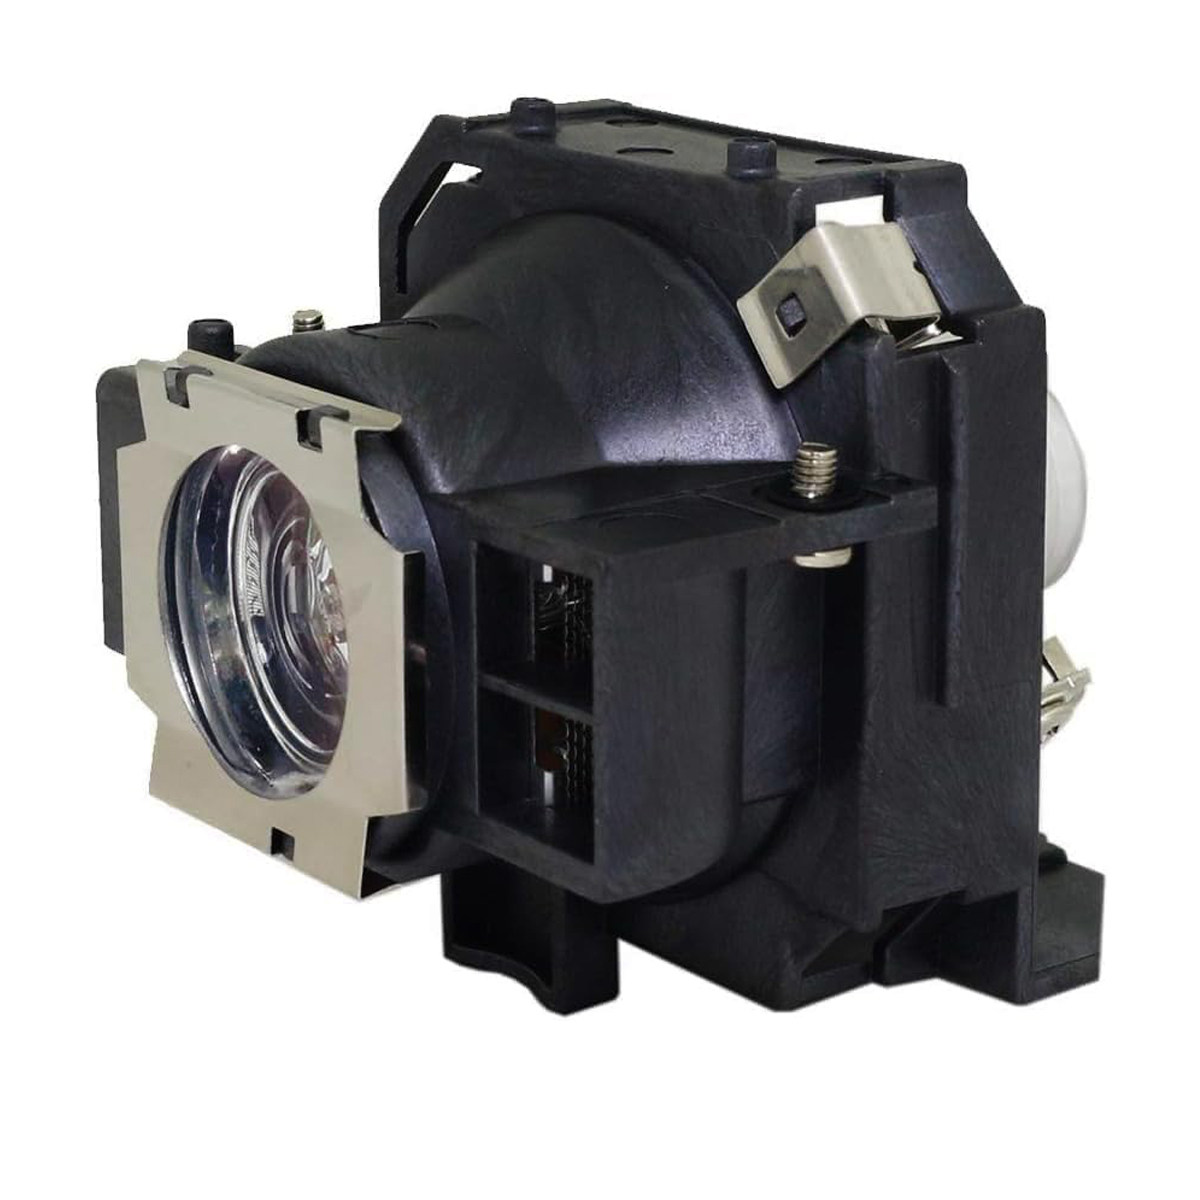 Replacement Projector lamp ELPLP32 For Epson EMP-732 EMP-737  EMP-740 EMP-745